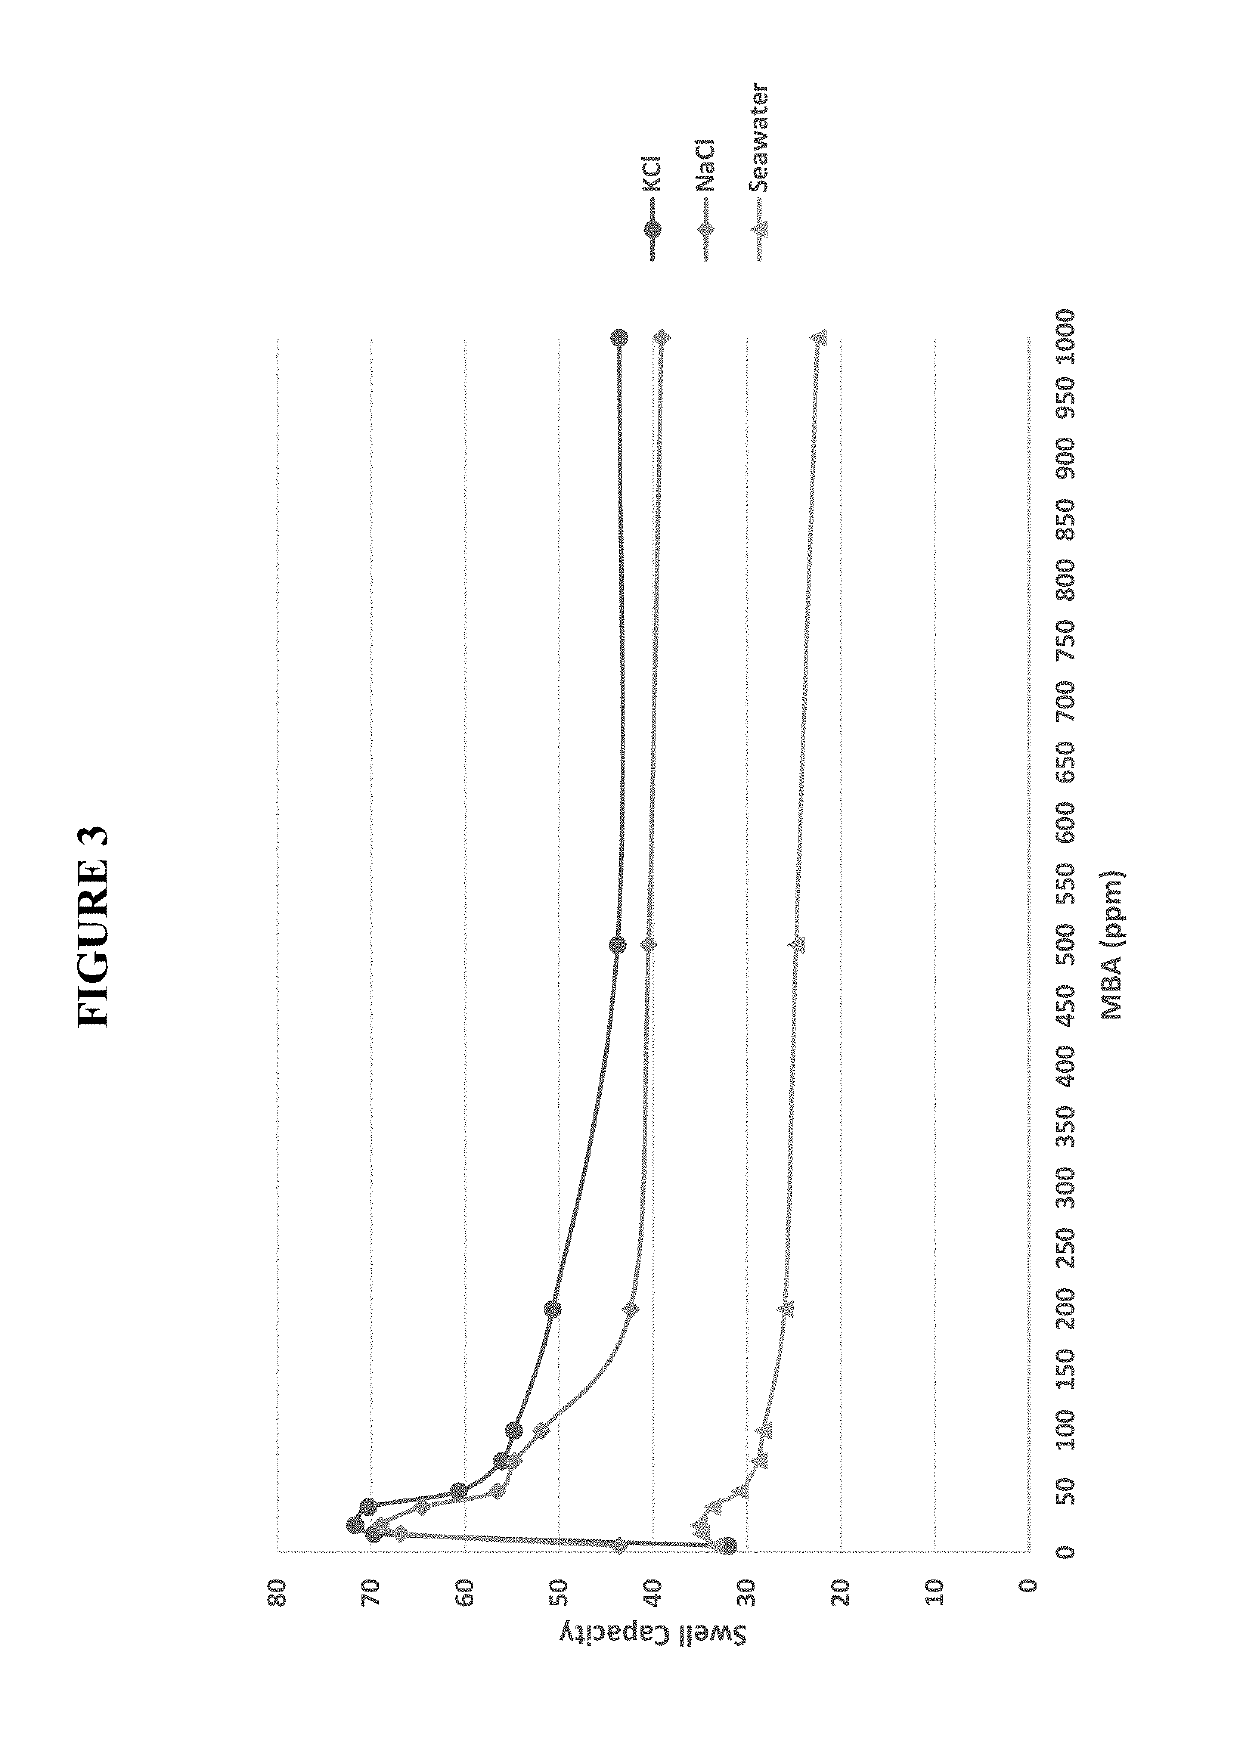 Preformed particle gel for enhanced oil recovery